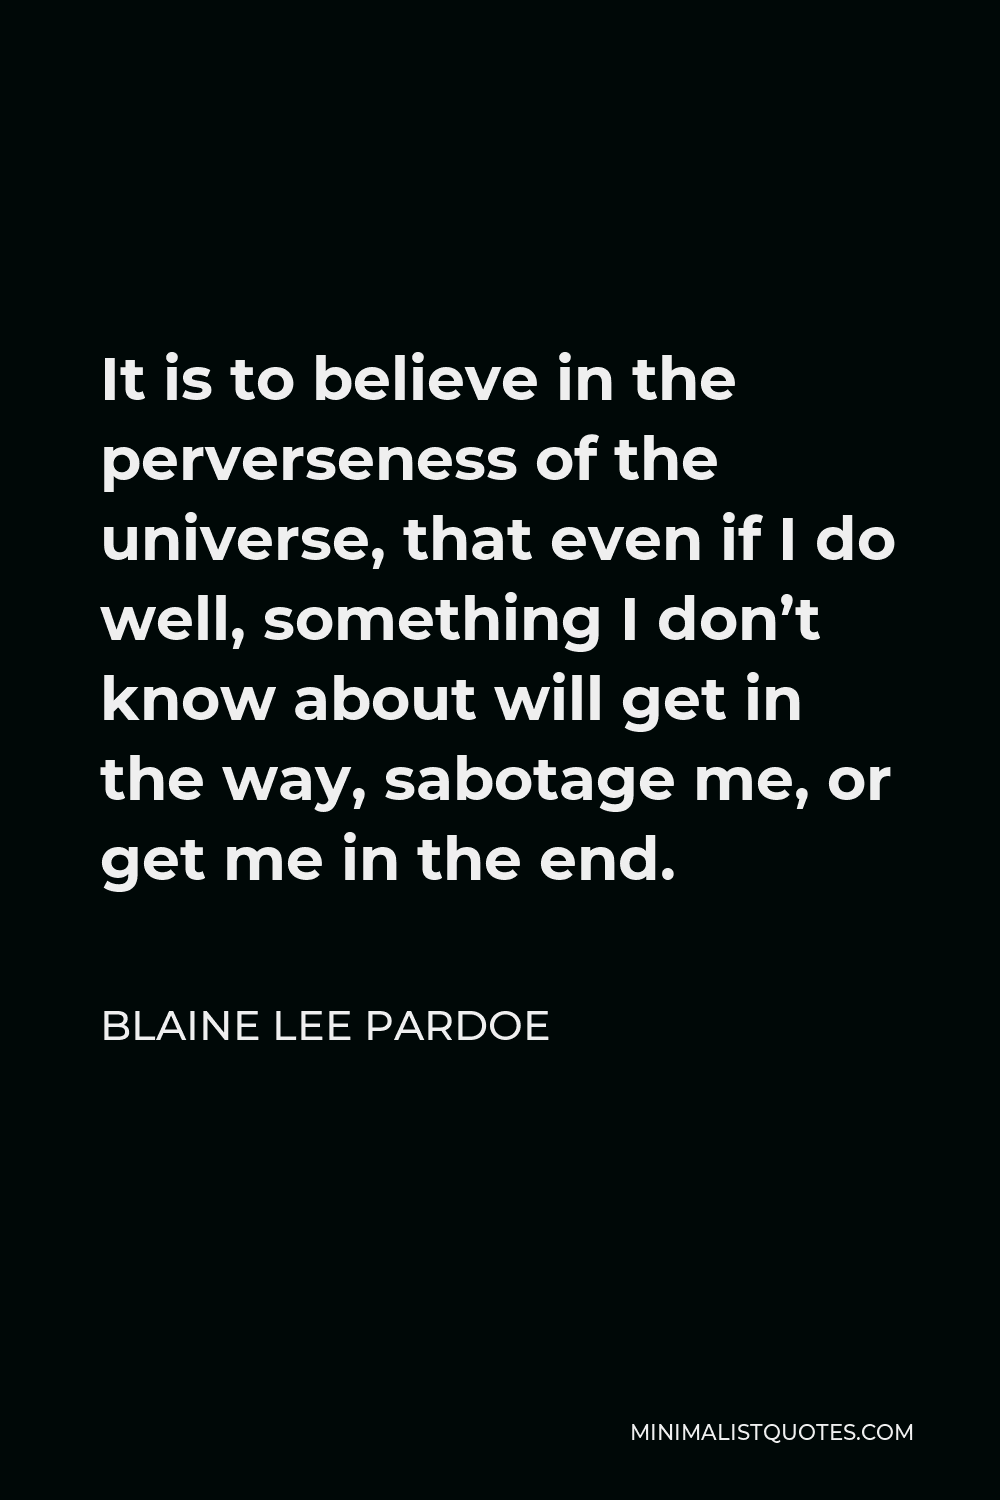 Blaine Lee Pardoe Quote - It is to believe in the perverseness of the universe, that even if I do well, something I don’t know about will get in the way, sabotage me, or get me in the end.